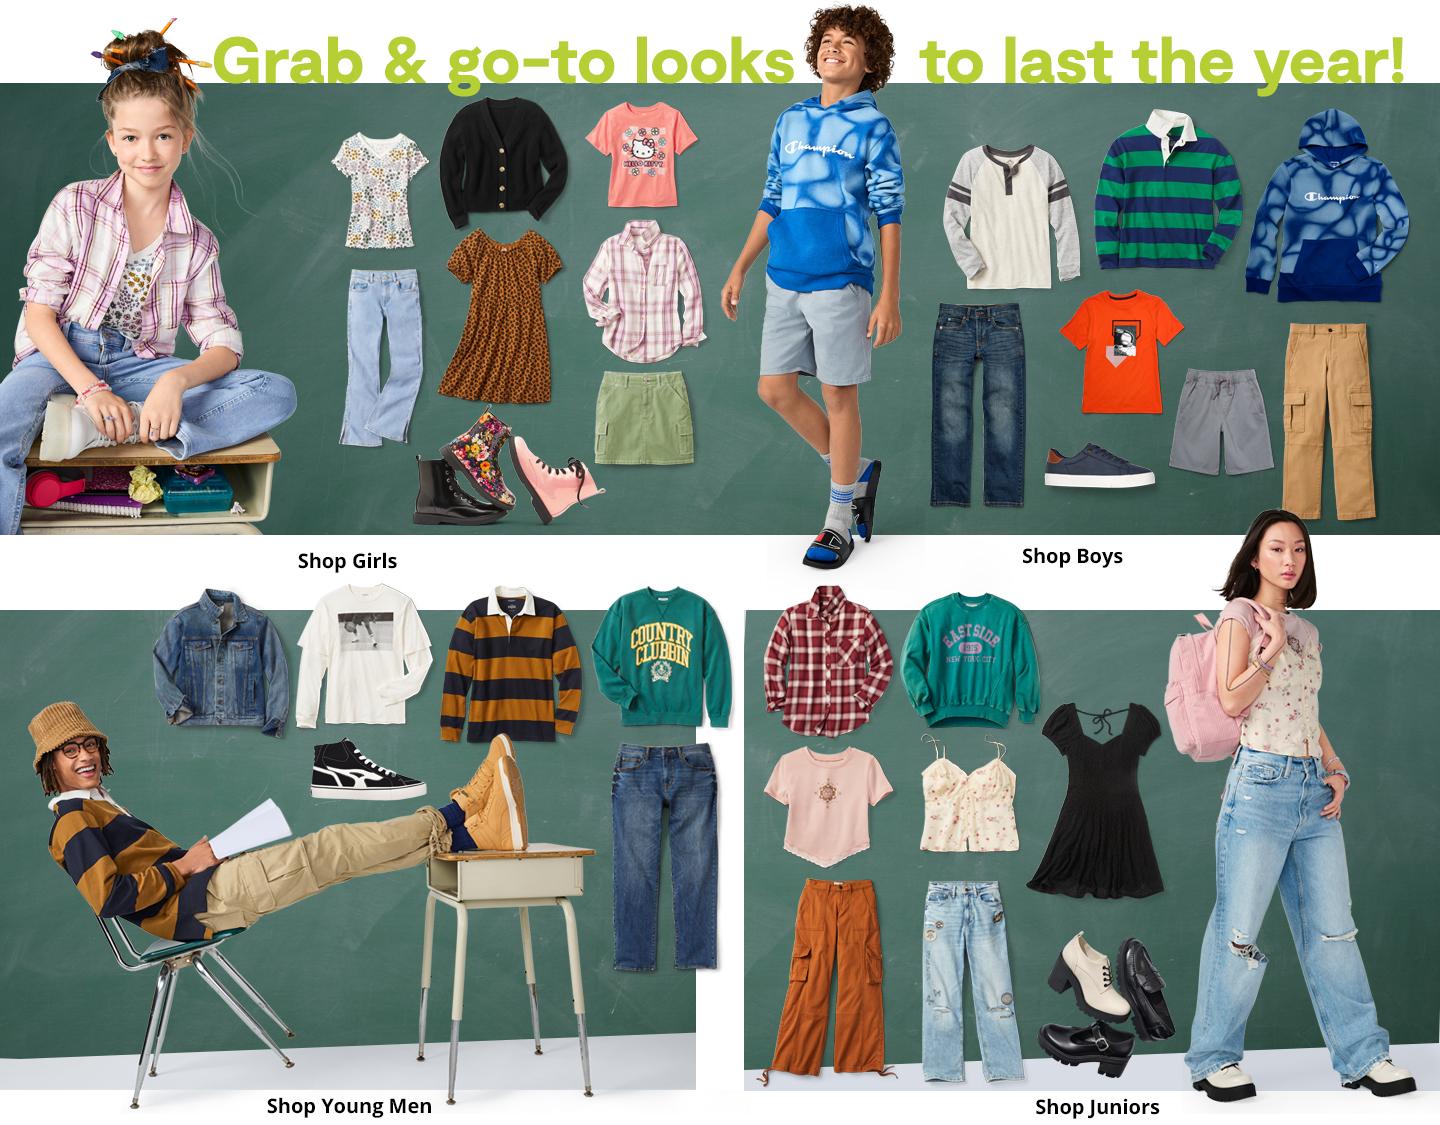 Grab & go-to looks